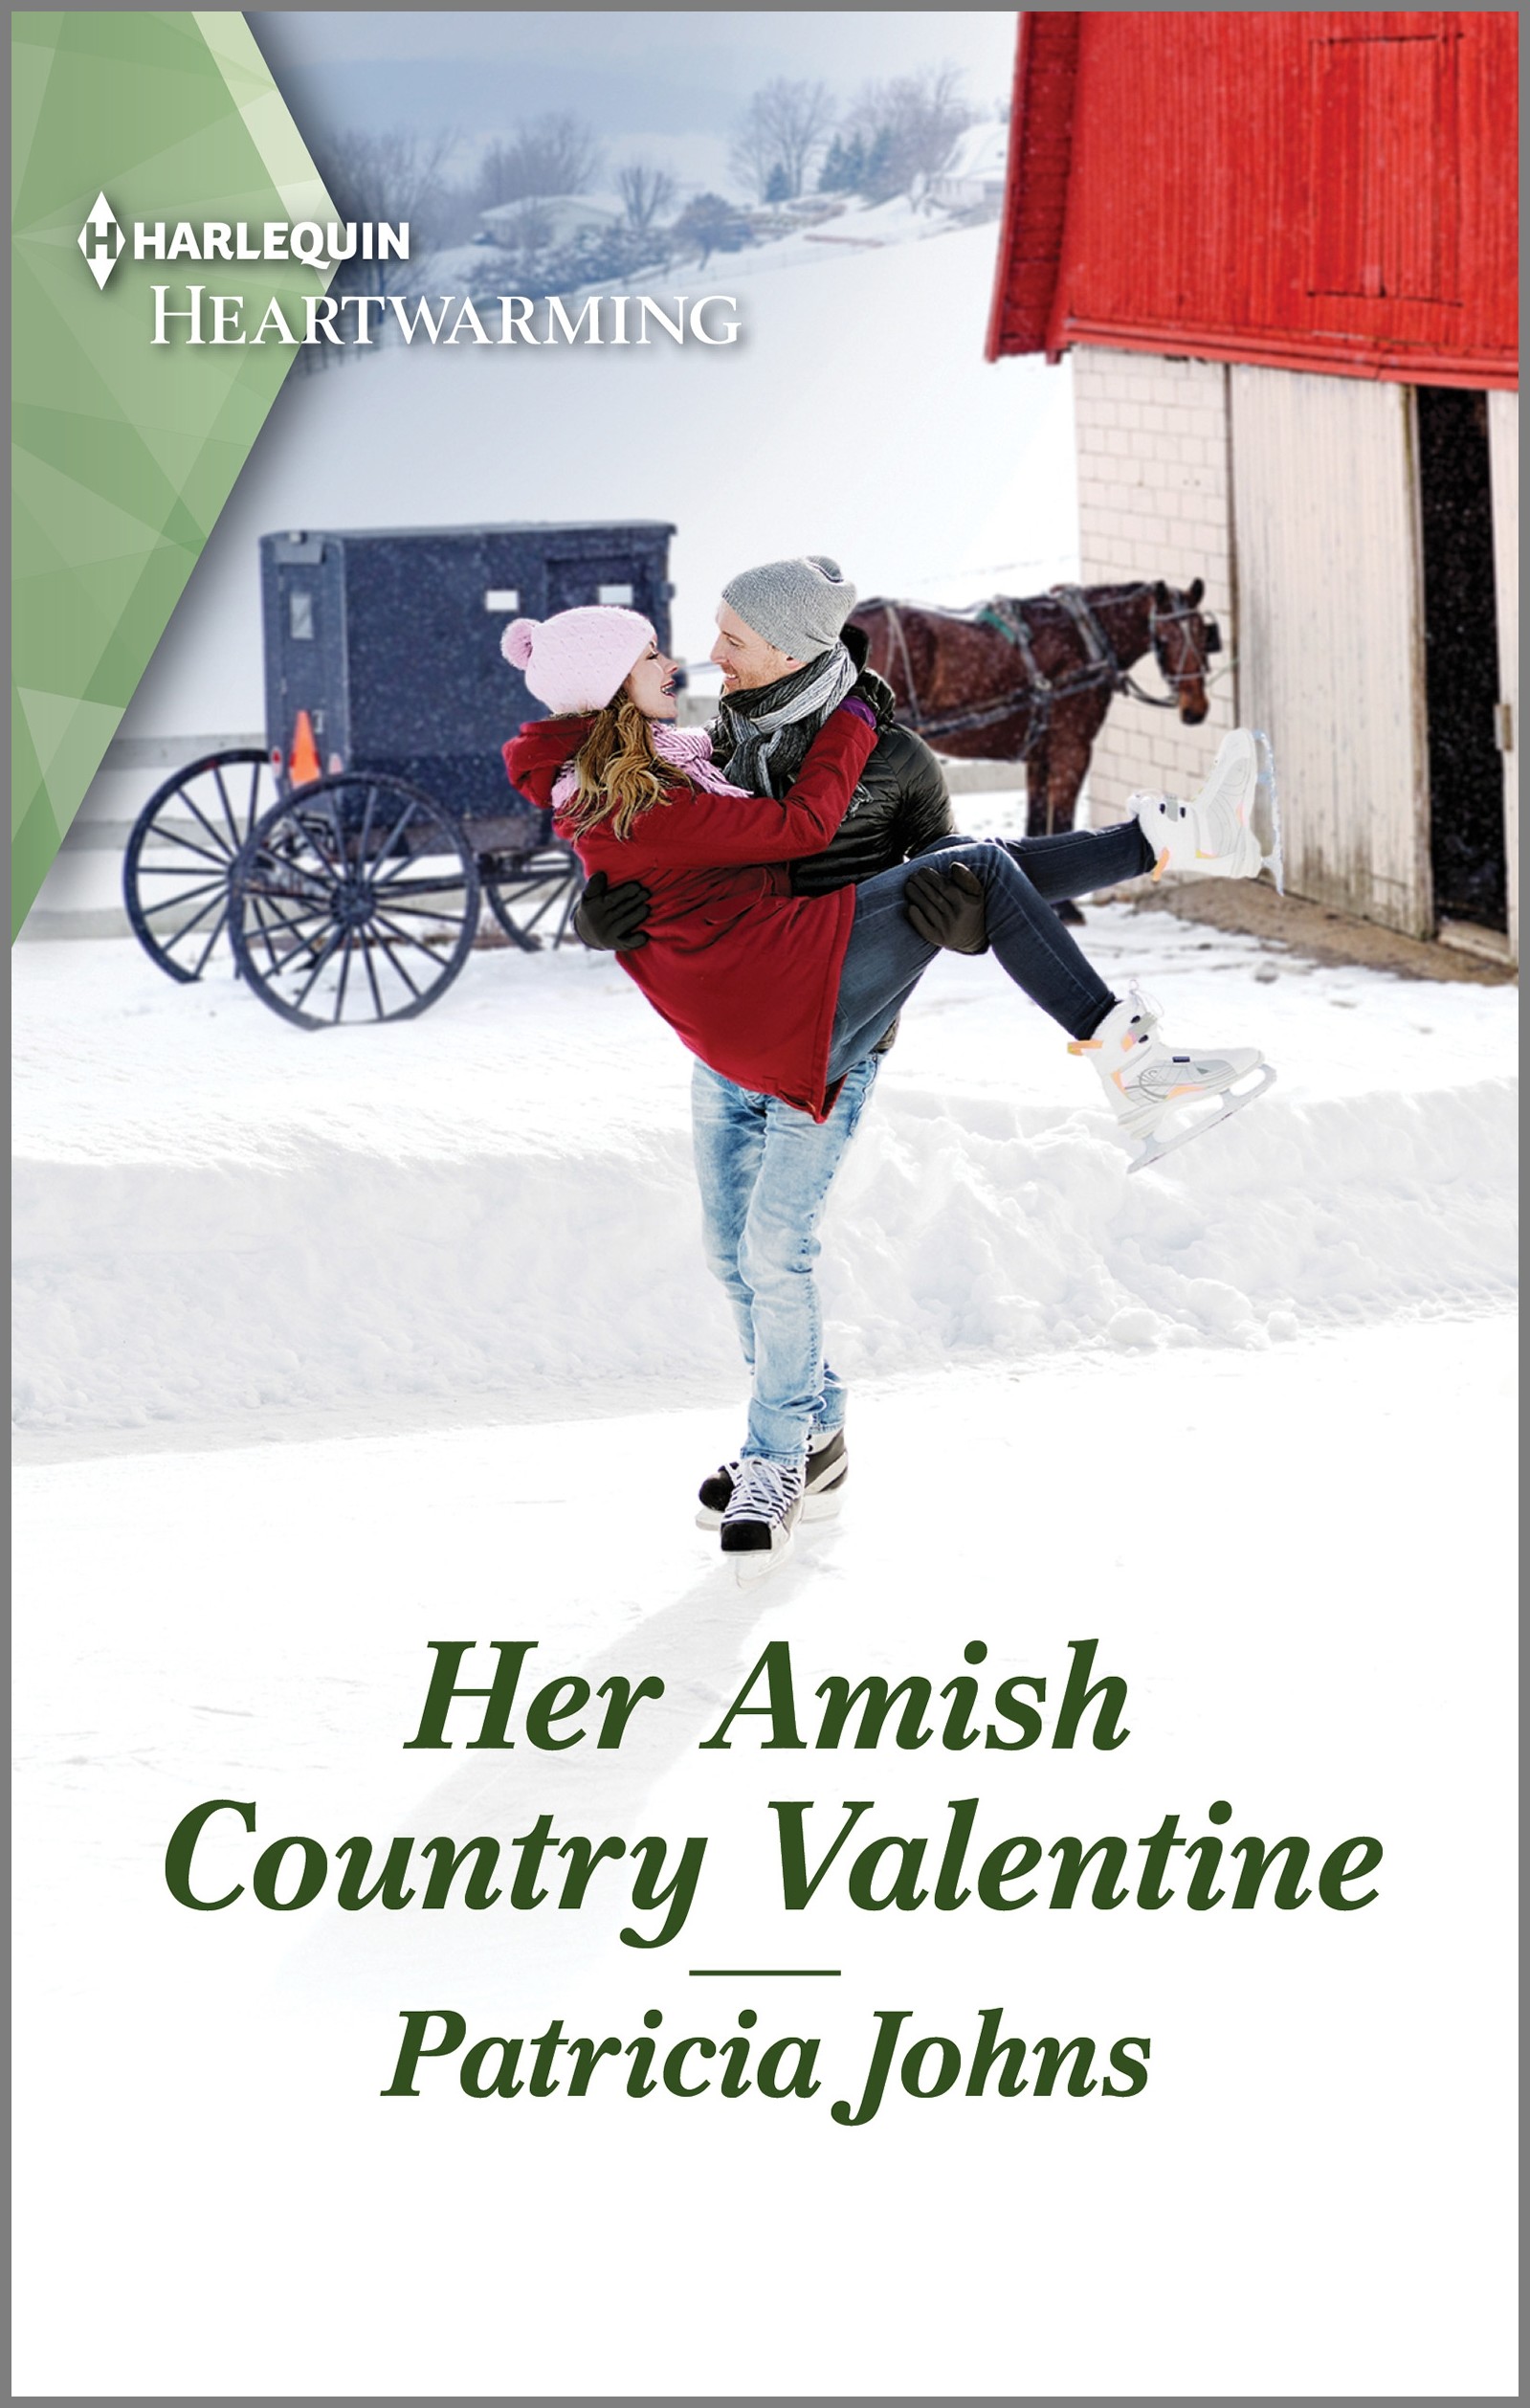 HER AMISH COUNTRY VALENTINE by Patricia Johns